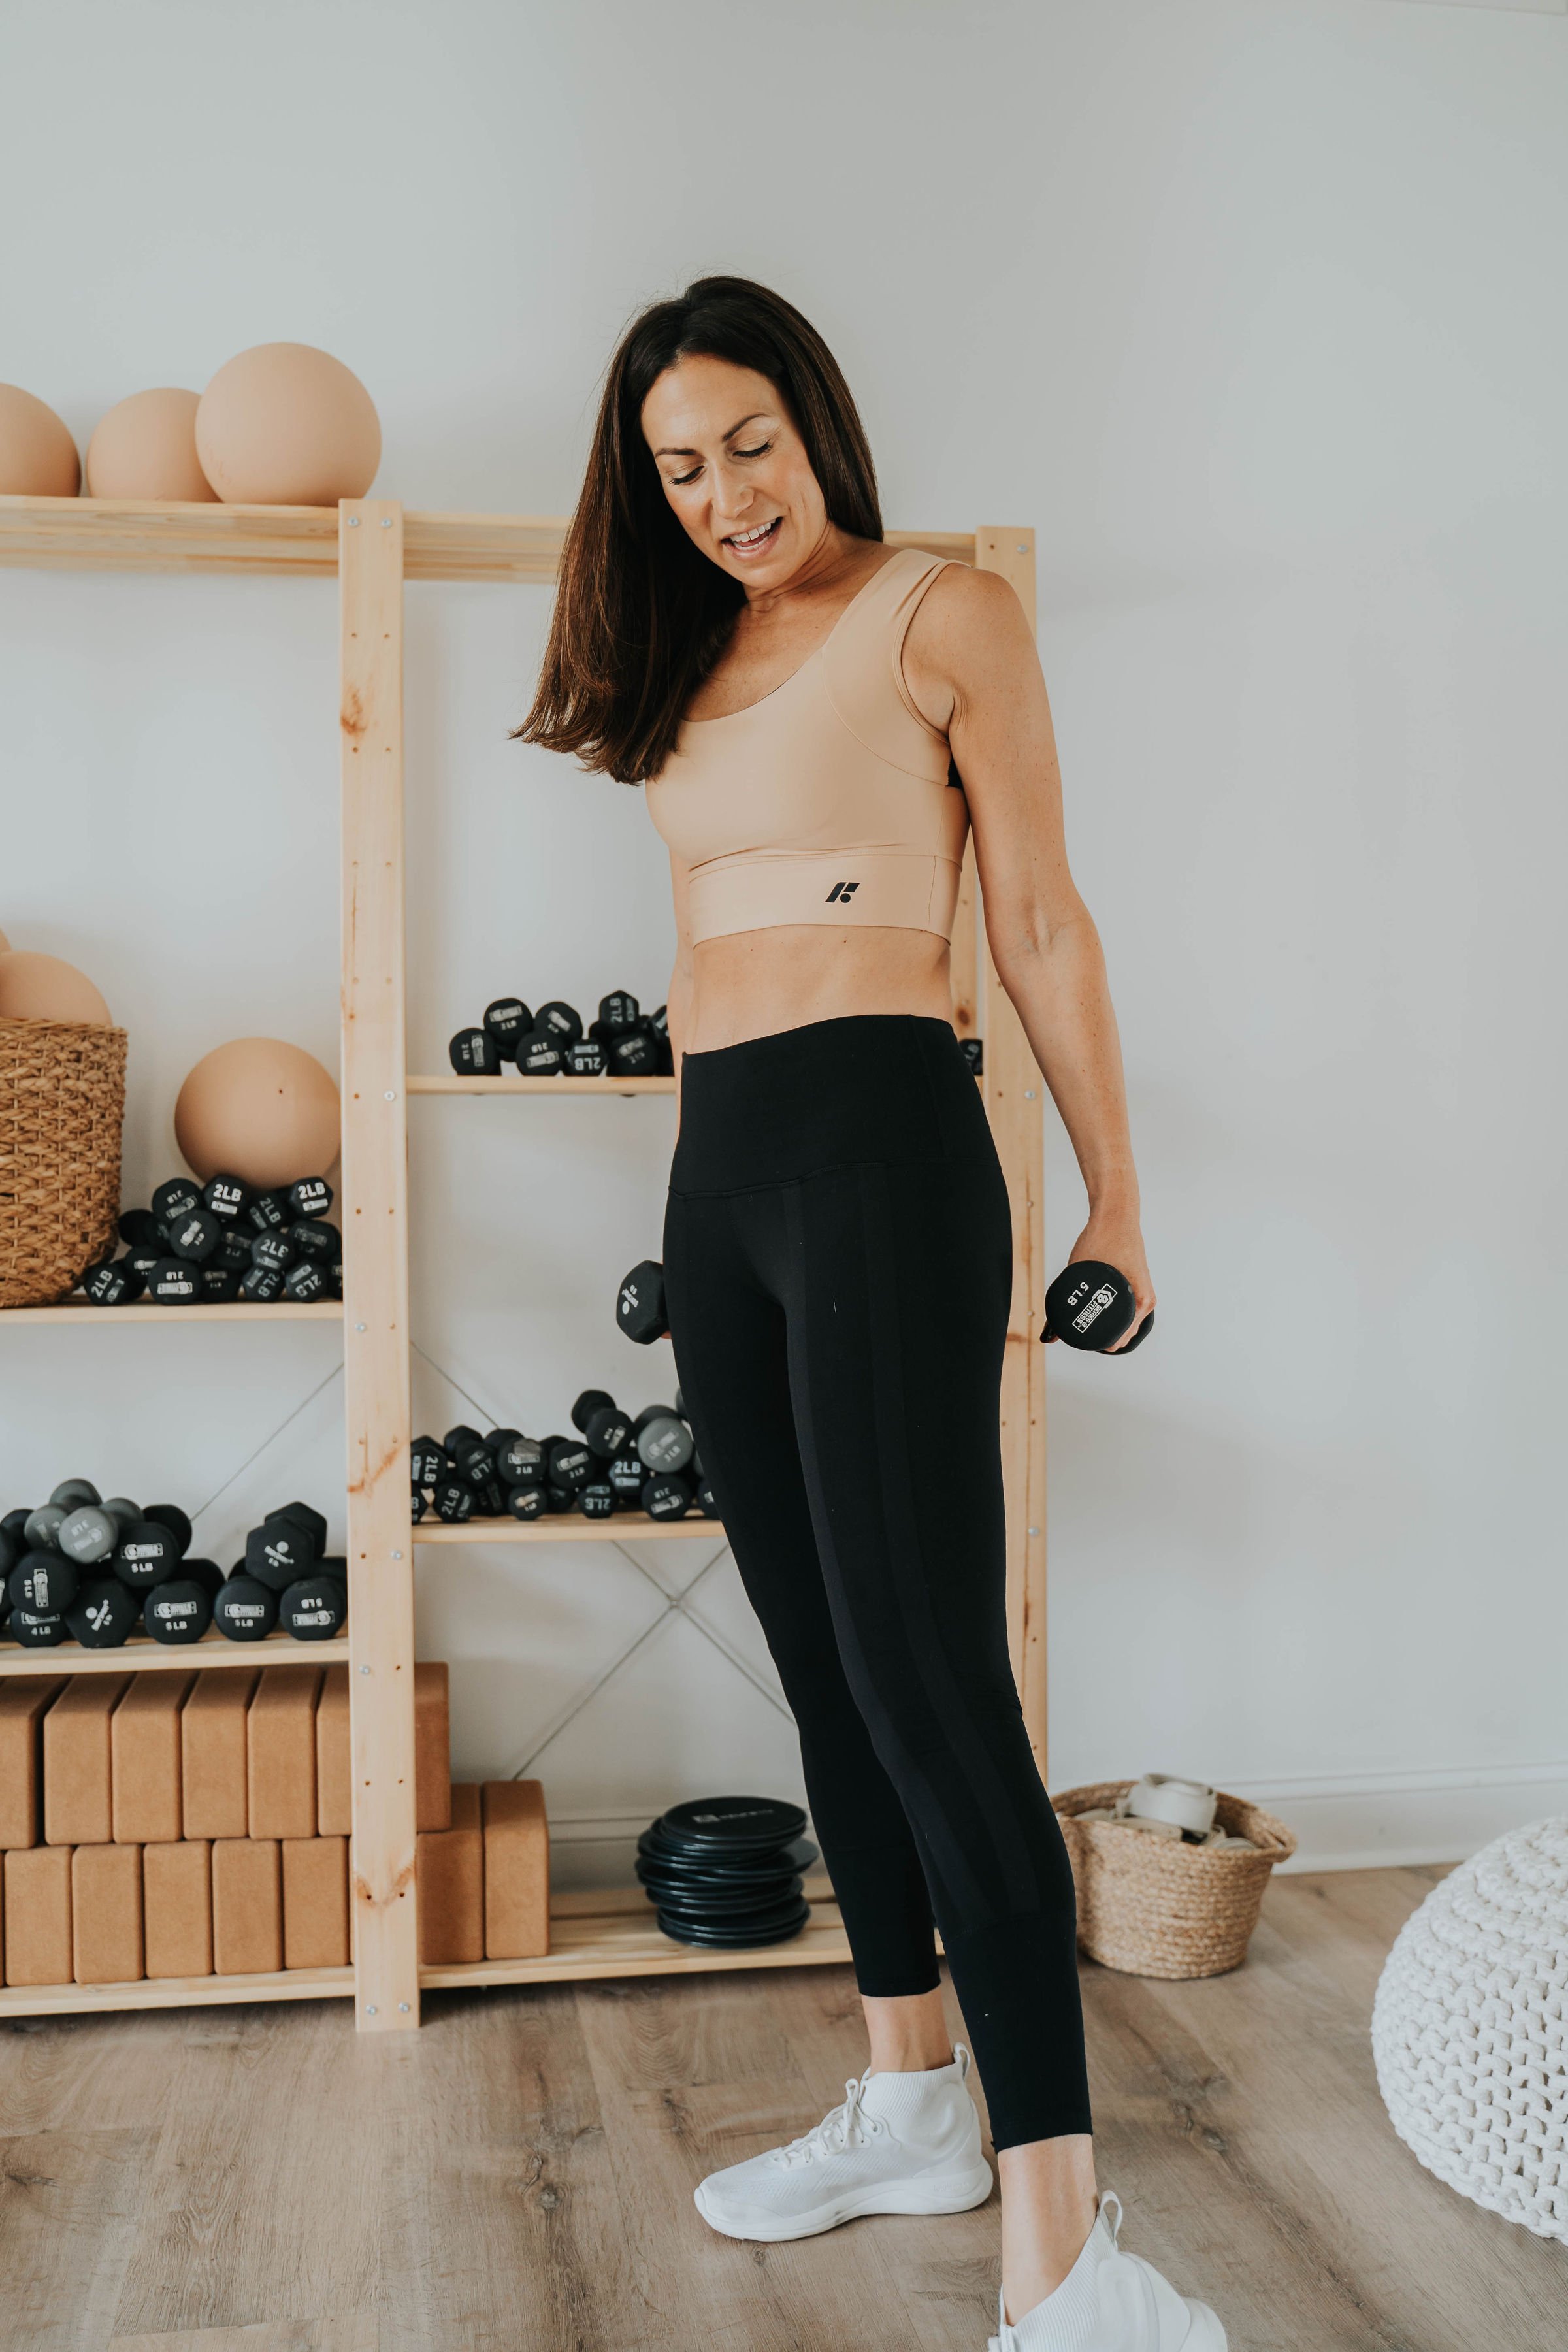 Activewear That Does More Than Just Look Cute — Fitness Finds on